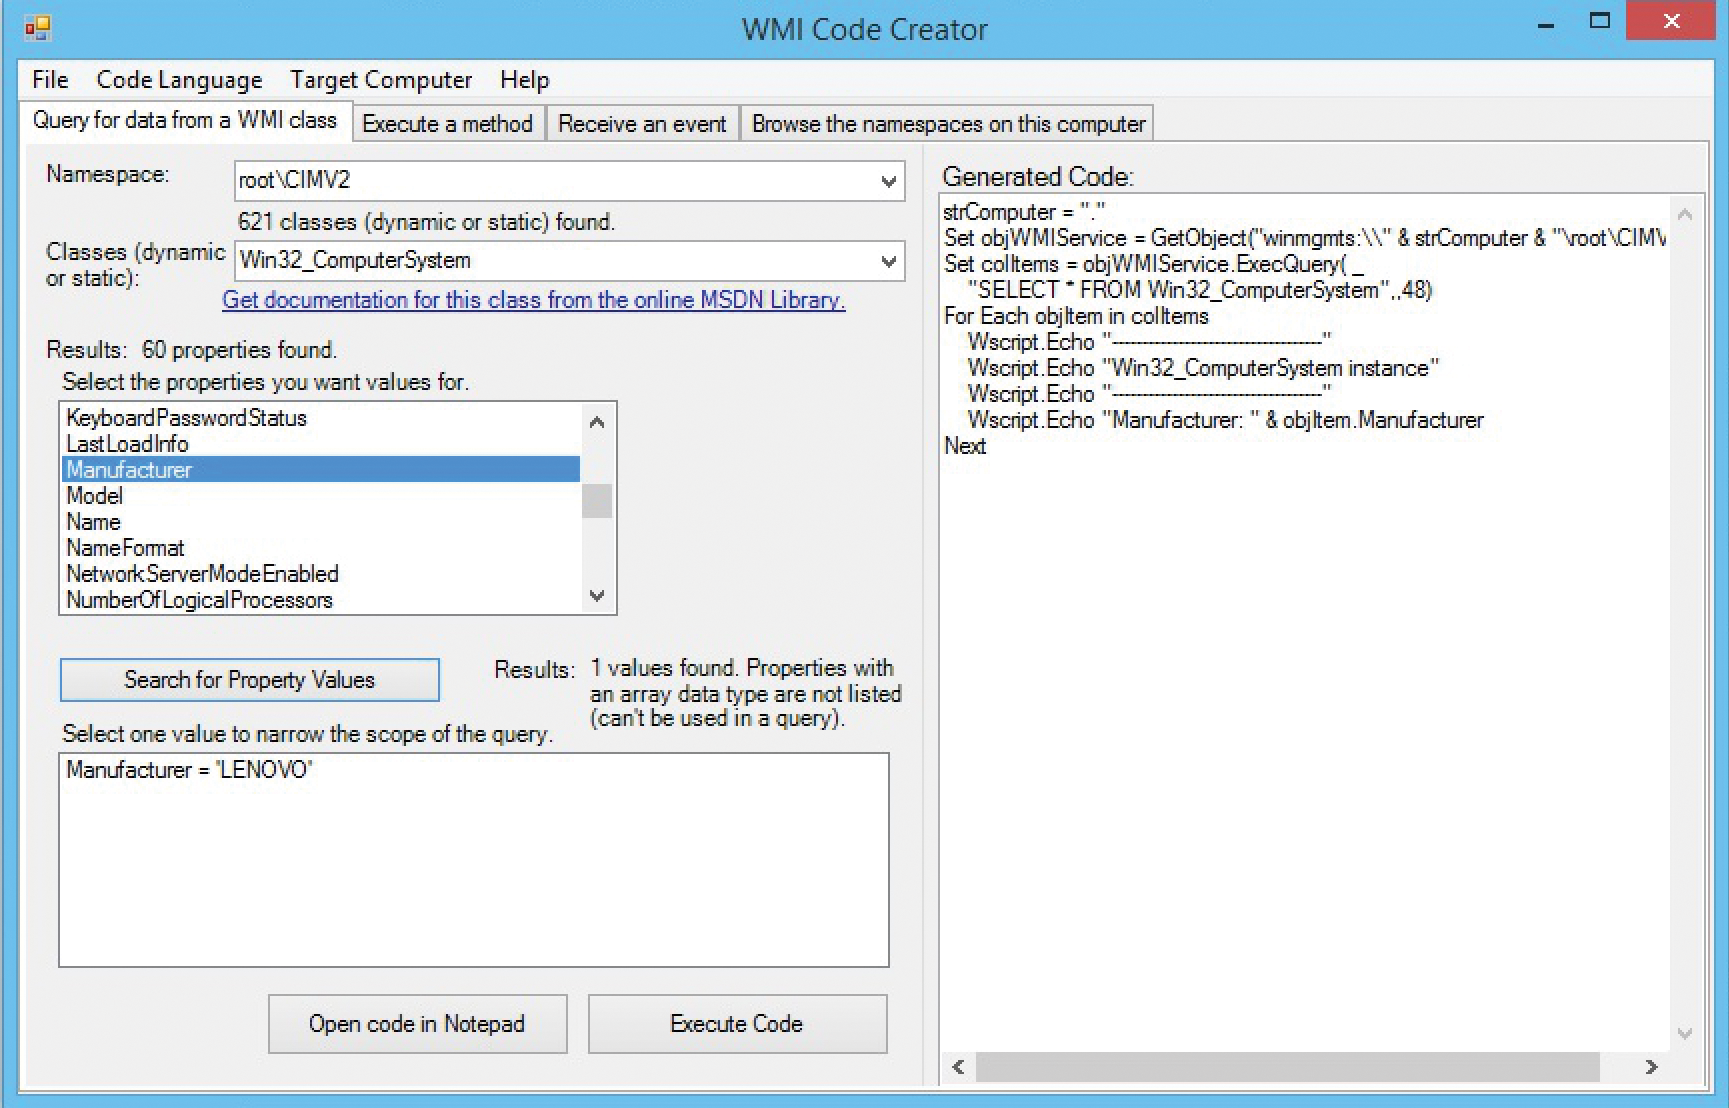 The WMI Code Creator is ideal to search for WMI objects and attributes for scripted queries. 